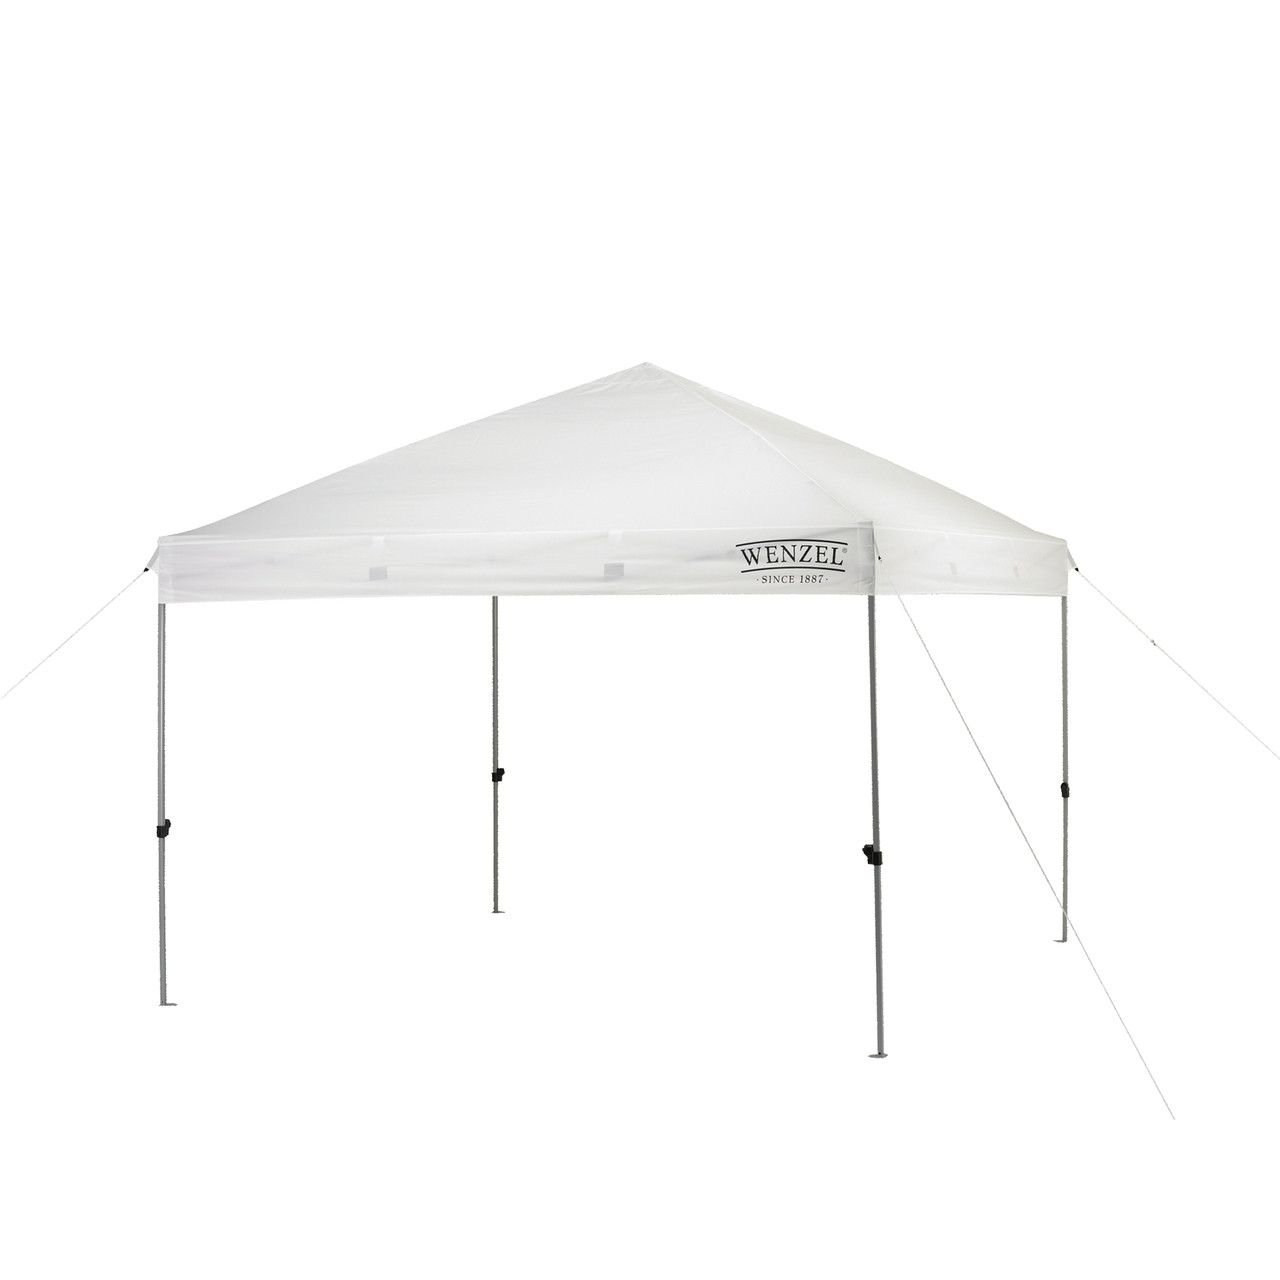 Wenzel Smartshade Canopy 10'x10', white, setup with the guy lines extended